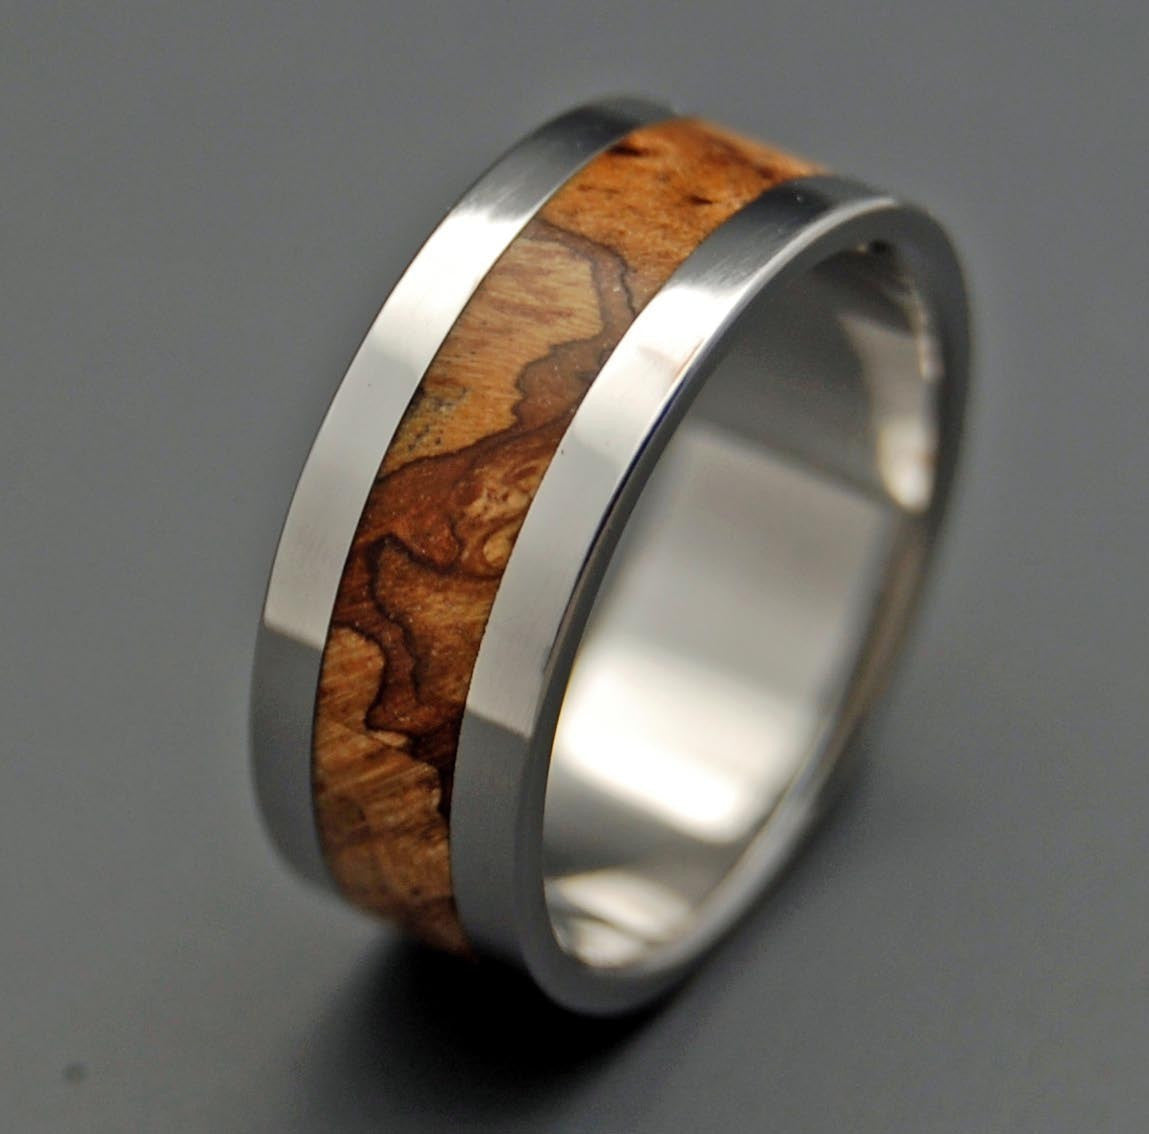 For the Love of Maple | Wood and Titanium Wedding Ring - Minter and Richter Designs